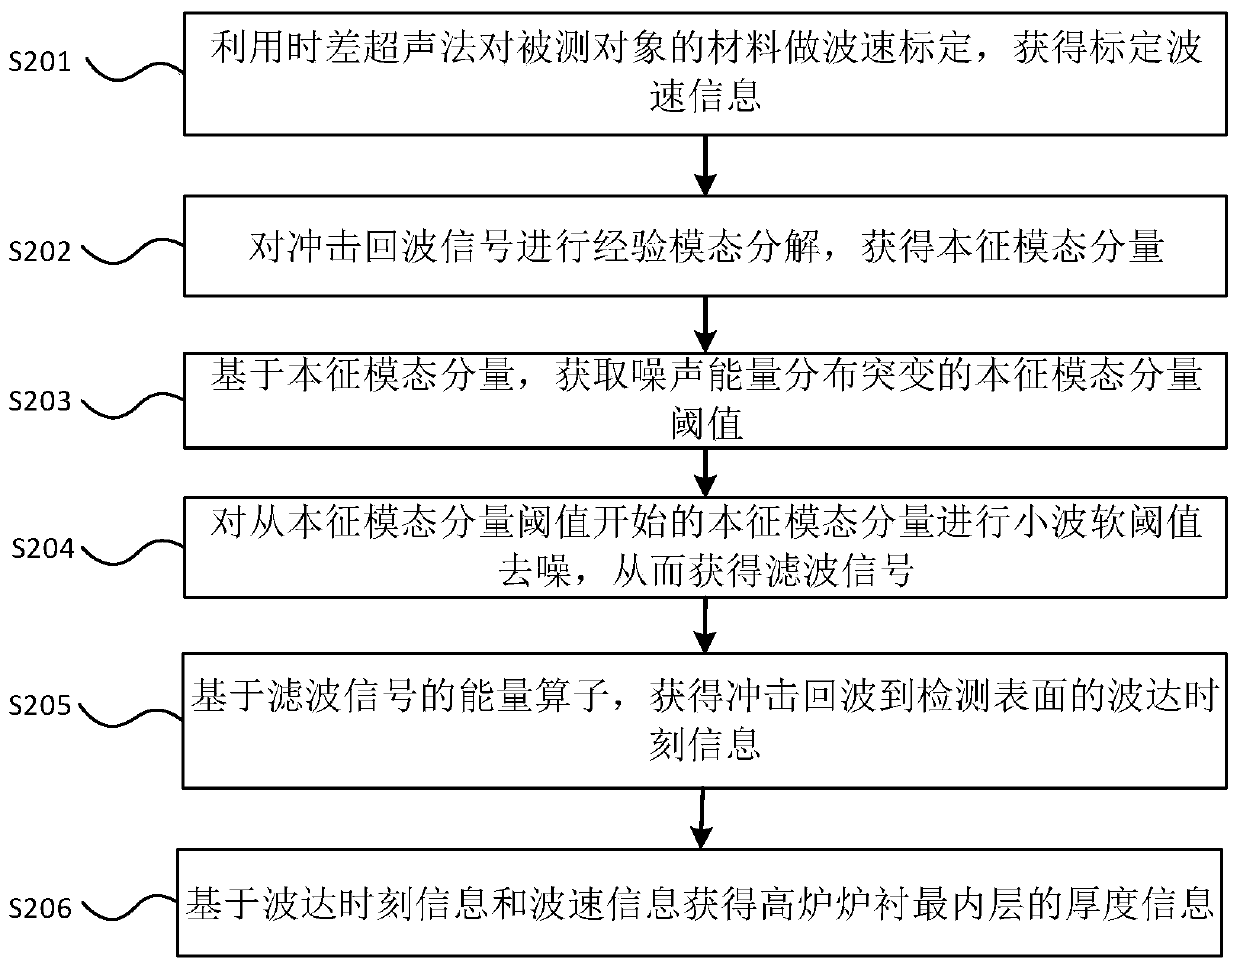 Signal processing method and system for blast furnace lining impact echo detection